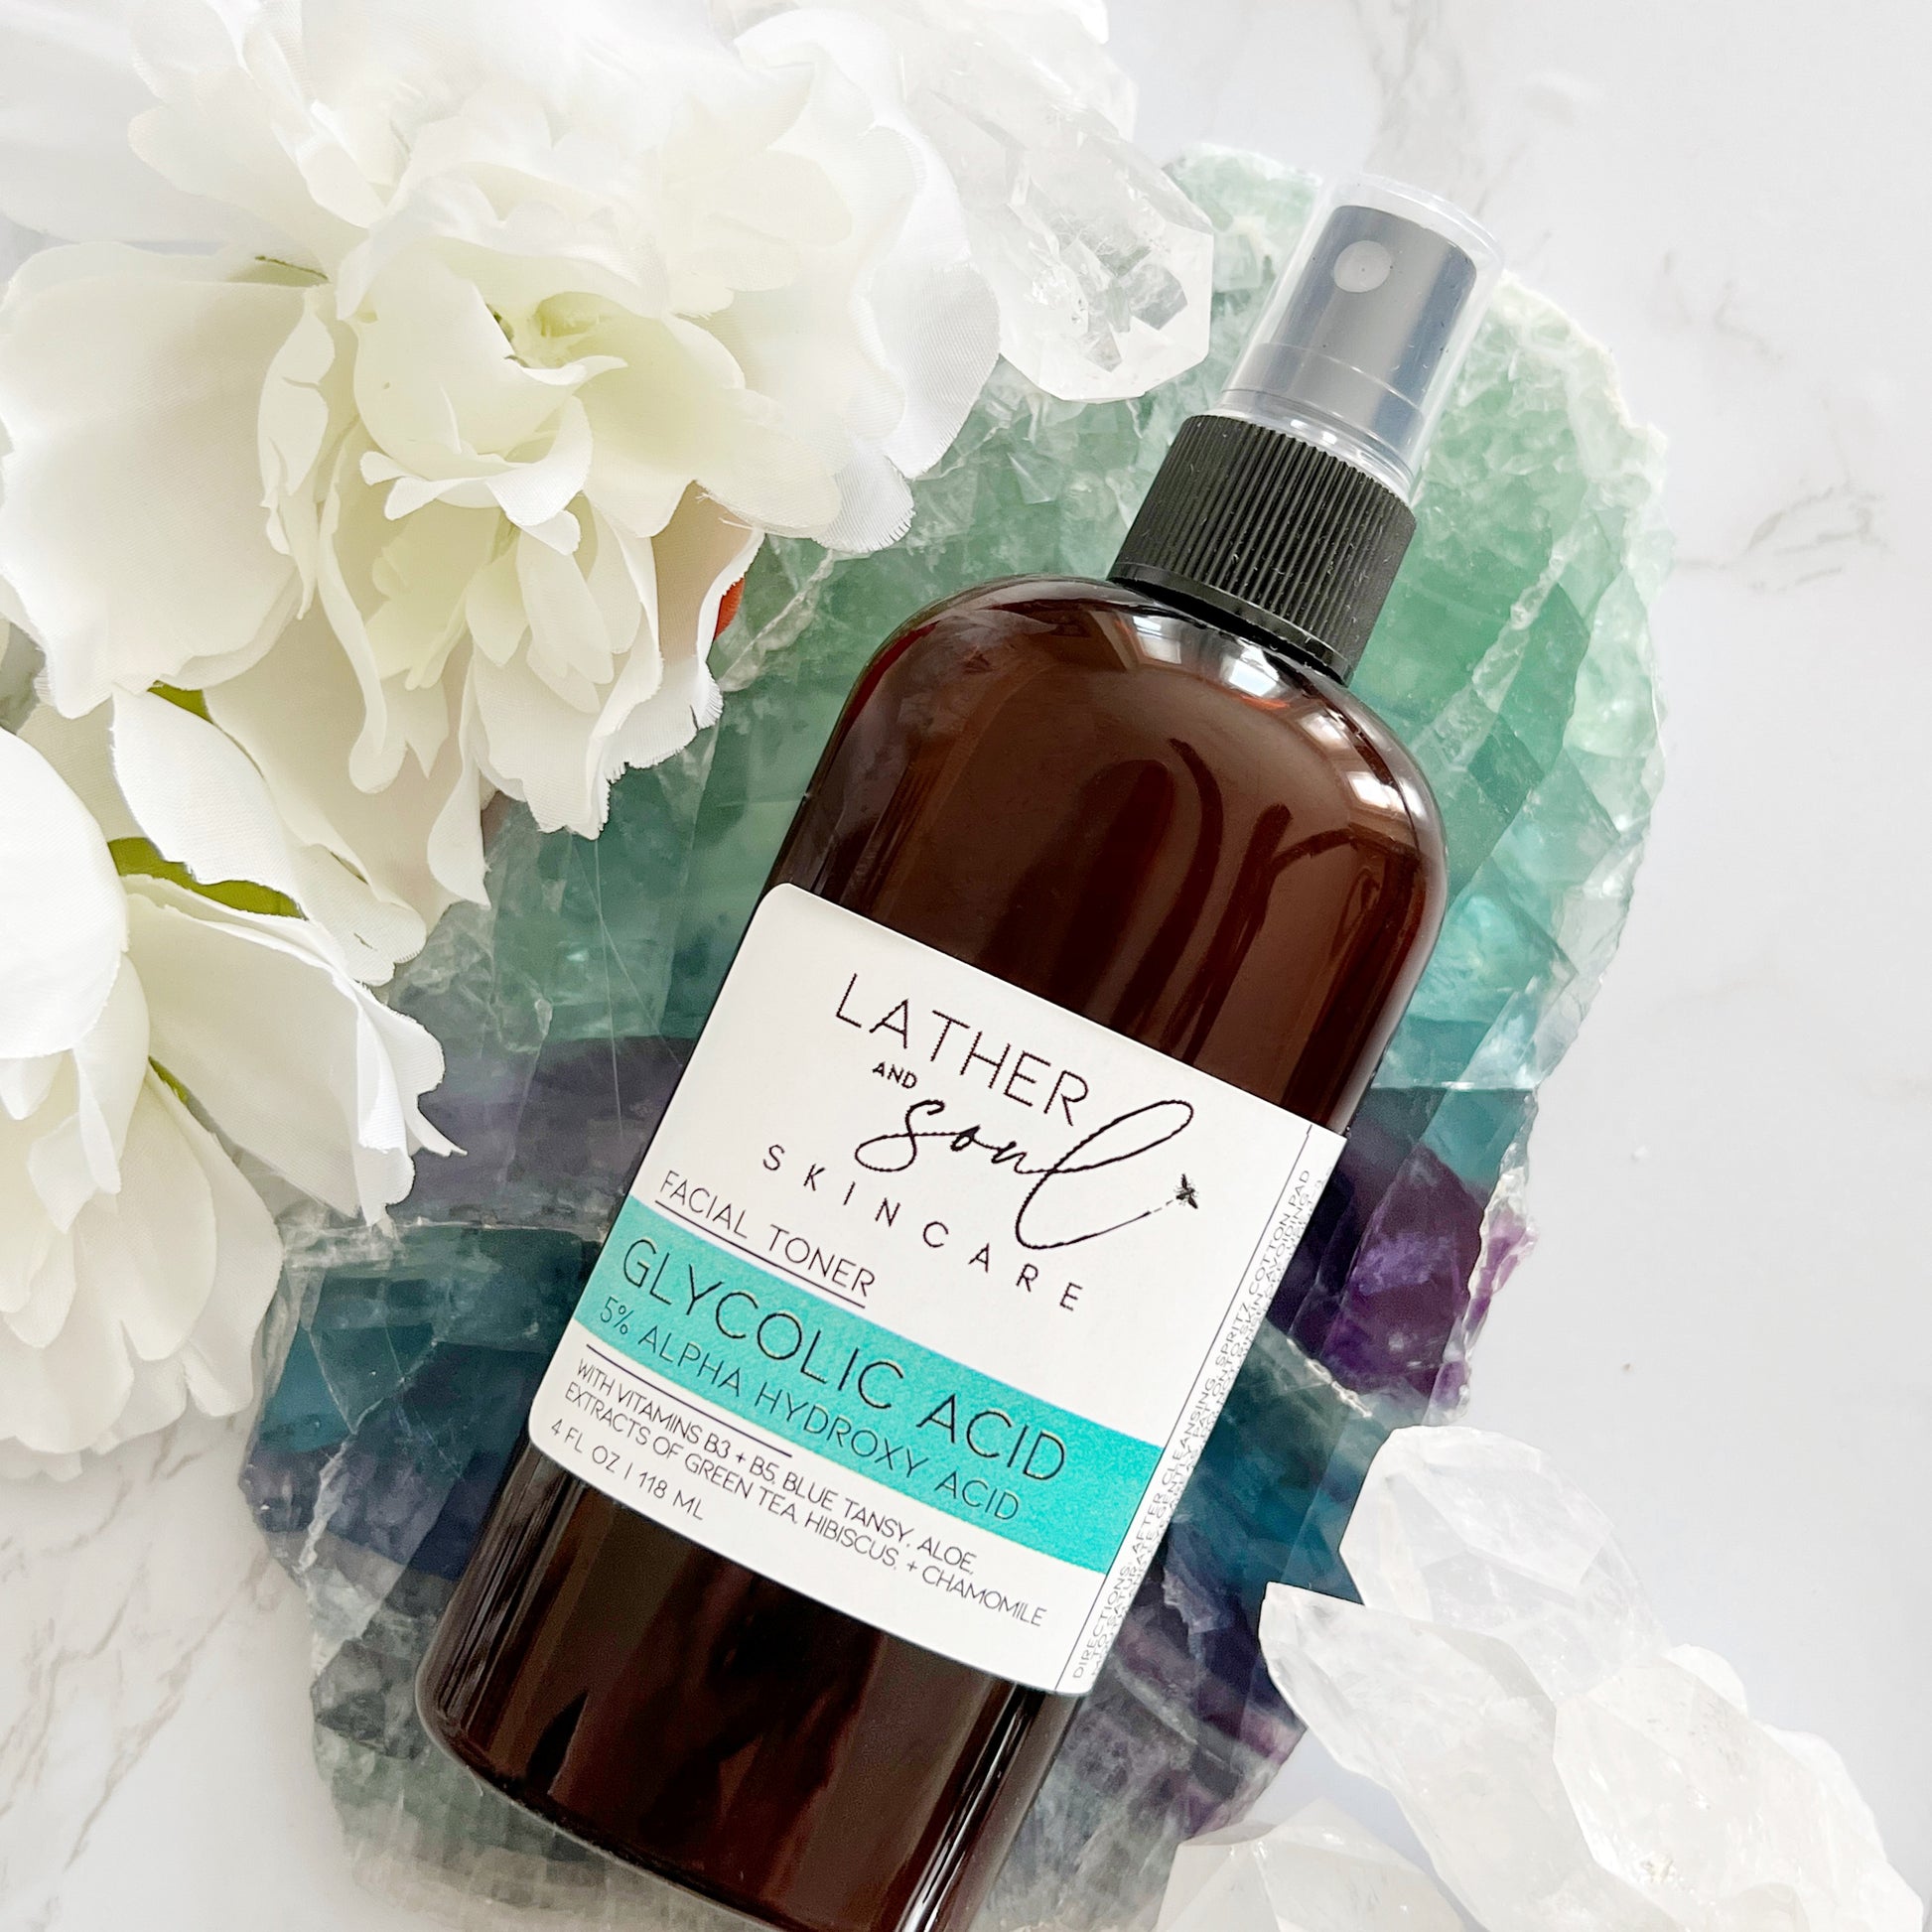 Facial toner with glycolic acid for smoother, younger looking skin, by Lather and Soul Skincare.